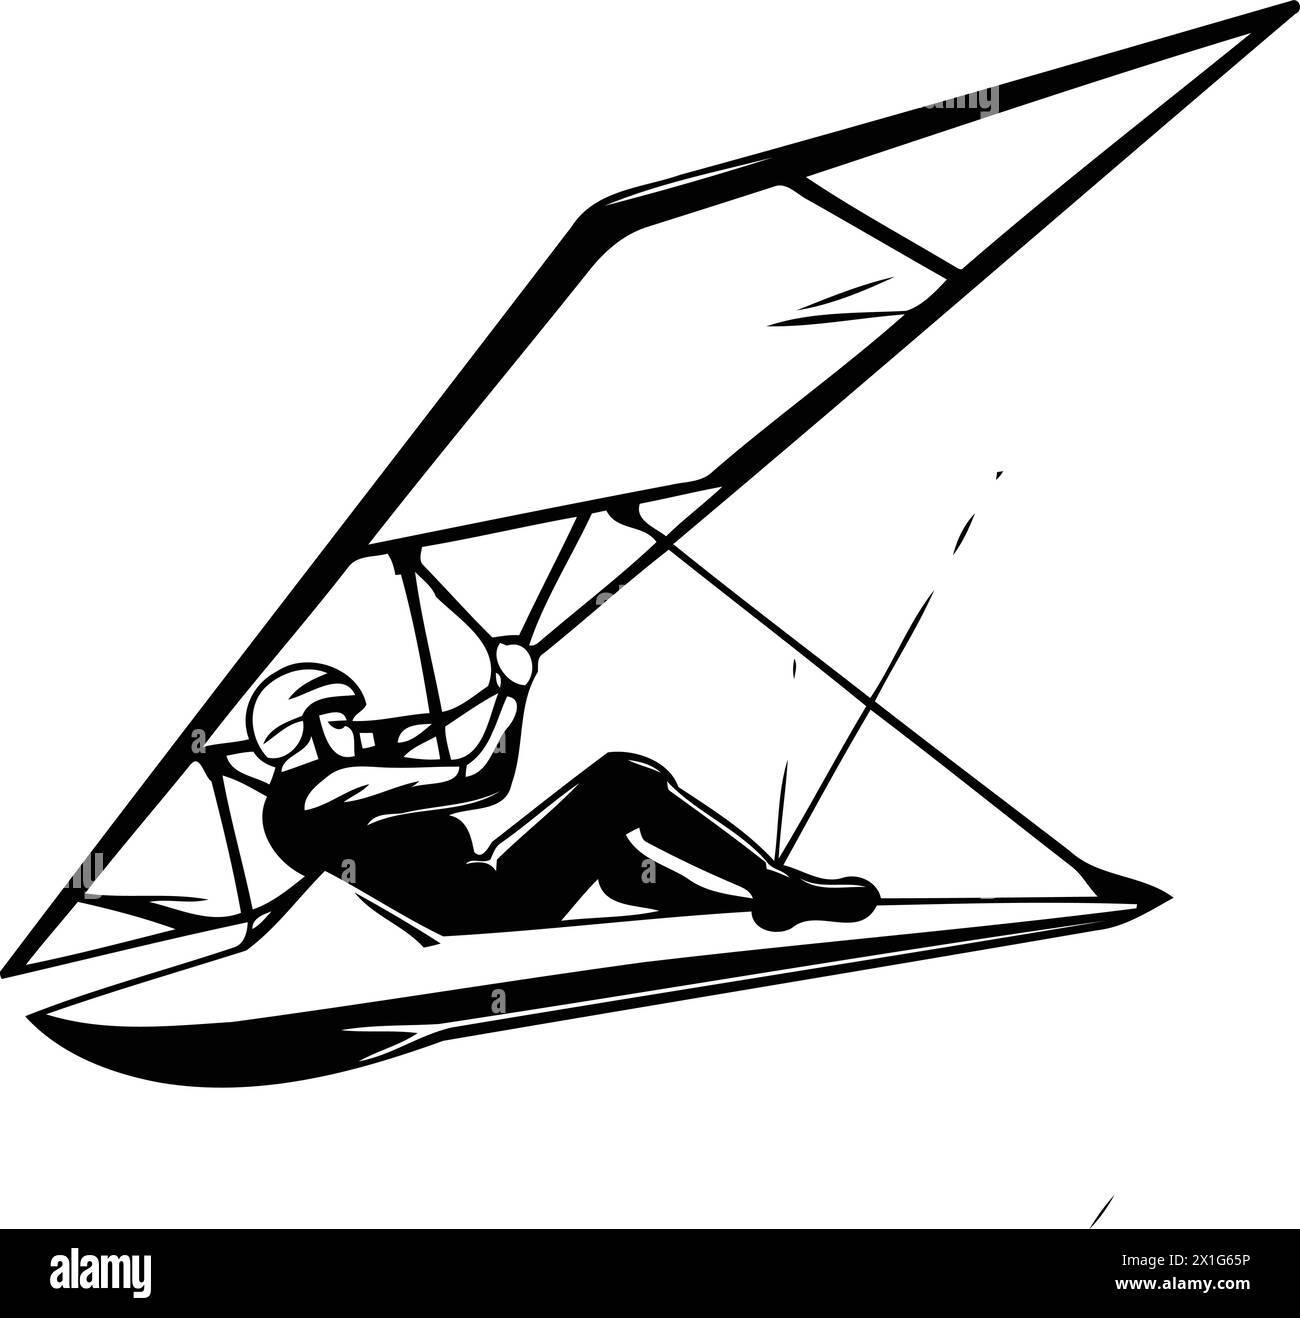 Hang glider. Extreme sport. Vector illustration in retro style Stock Vector